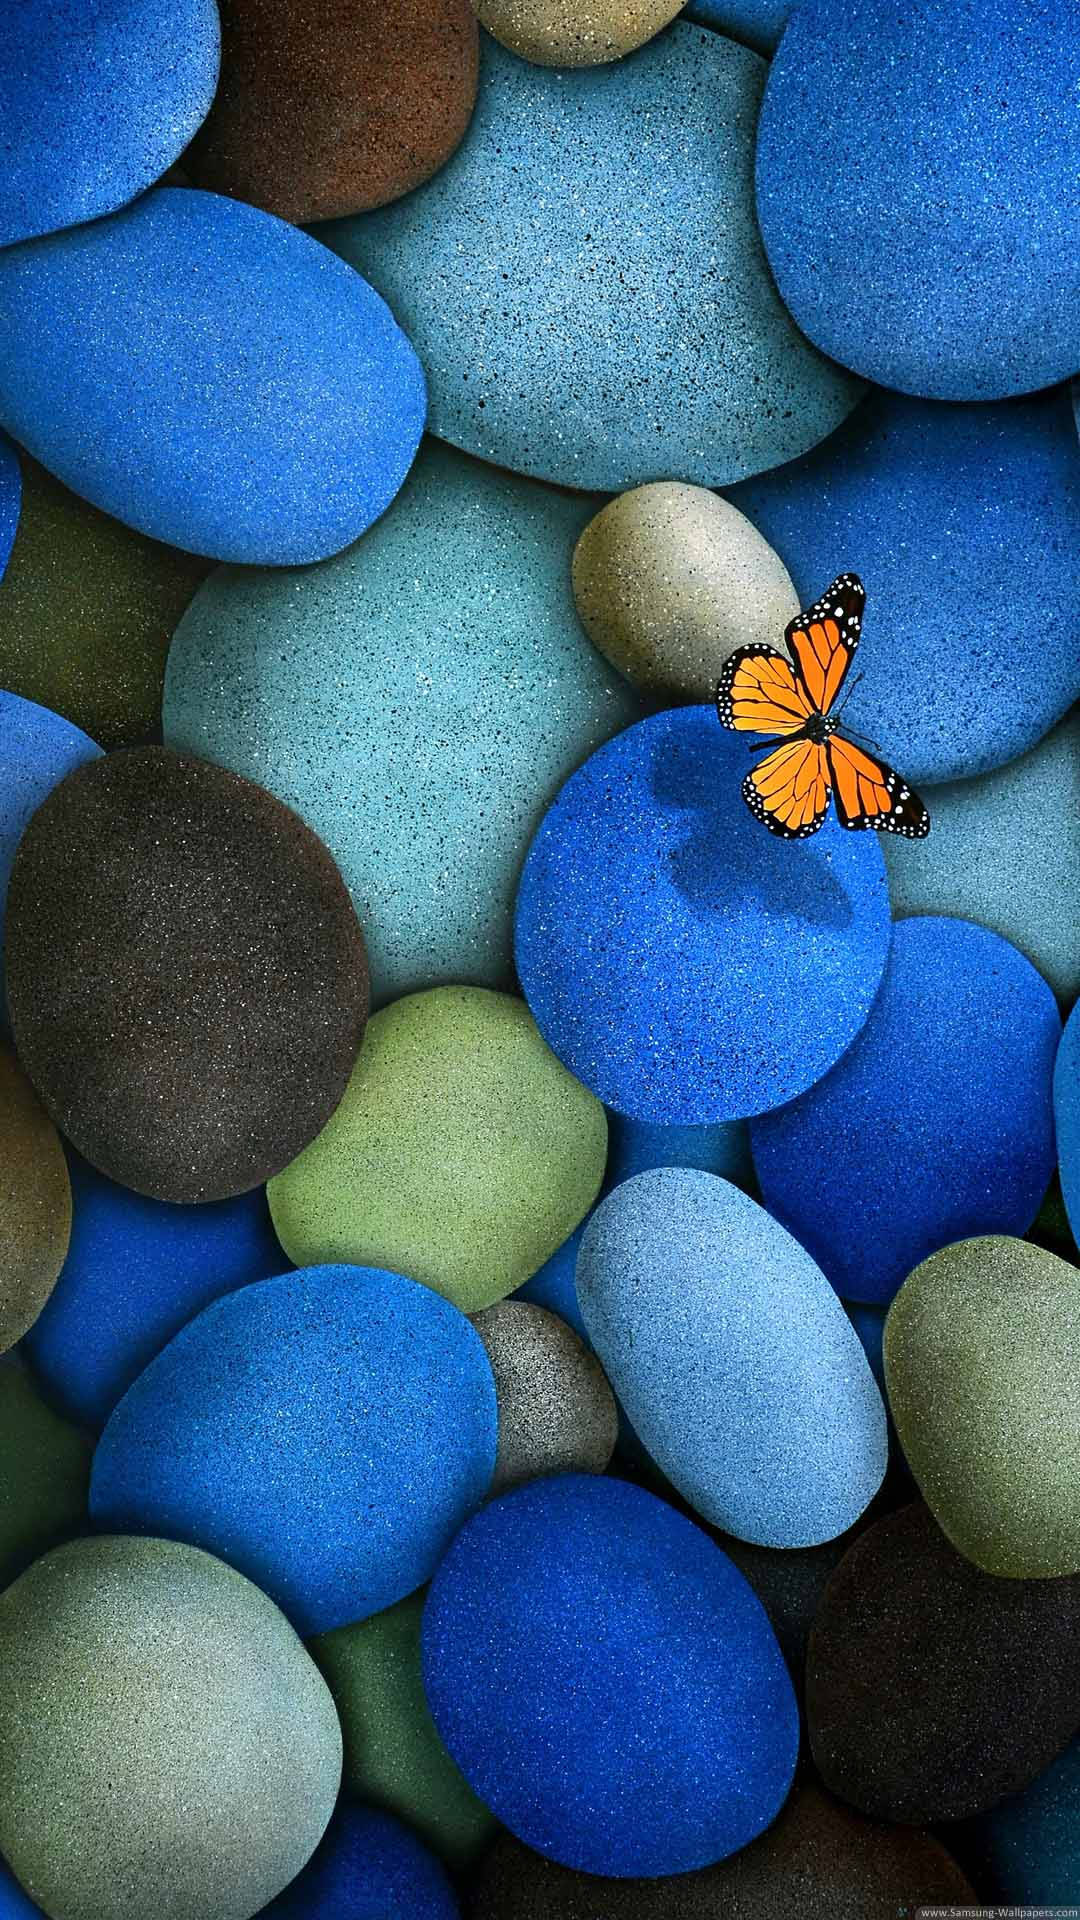 Beautiful Hd River Stones And Butterfly